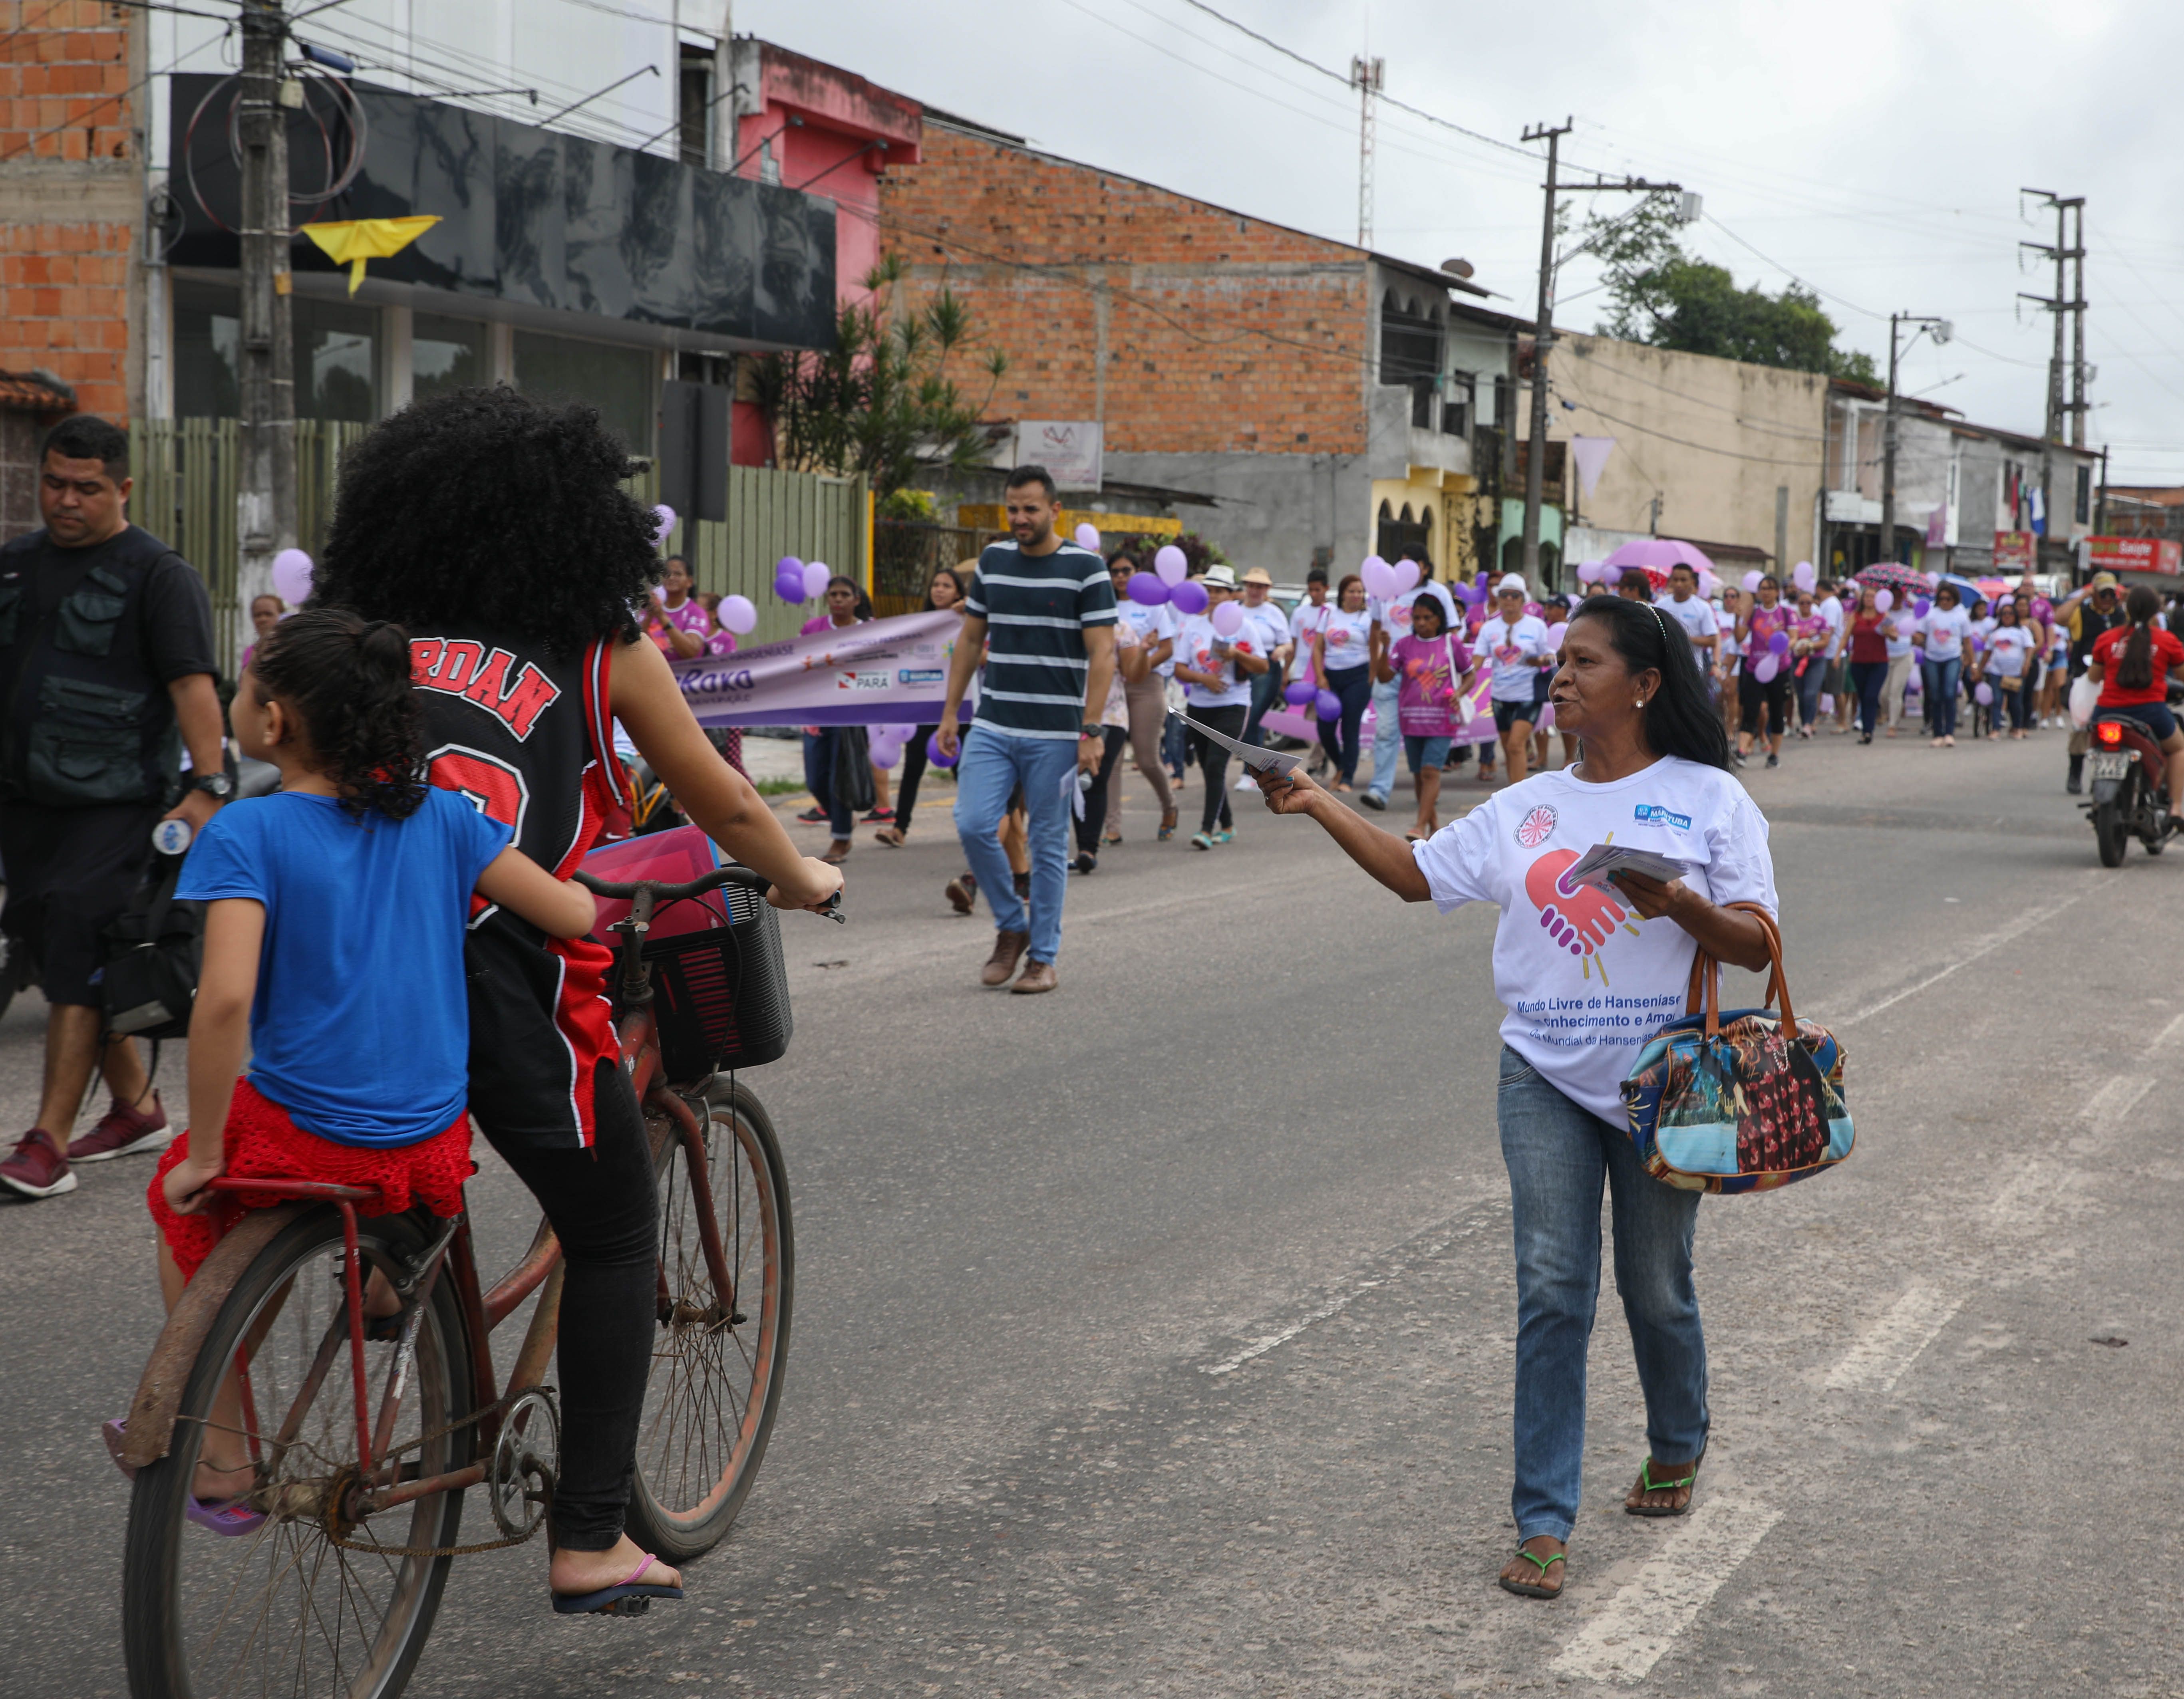 A MOHAN volunteer holds out an informational brochure to a passing bicyclist during a leprosy awareness march in Marituba. Image by Anton L. Delgado. Brazil, 2020.